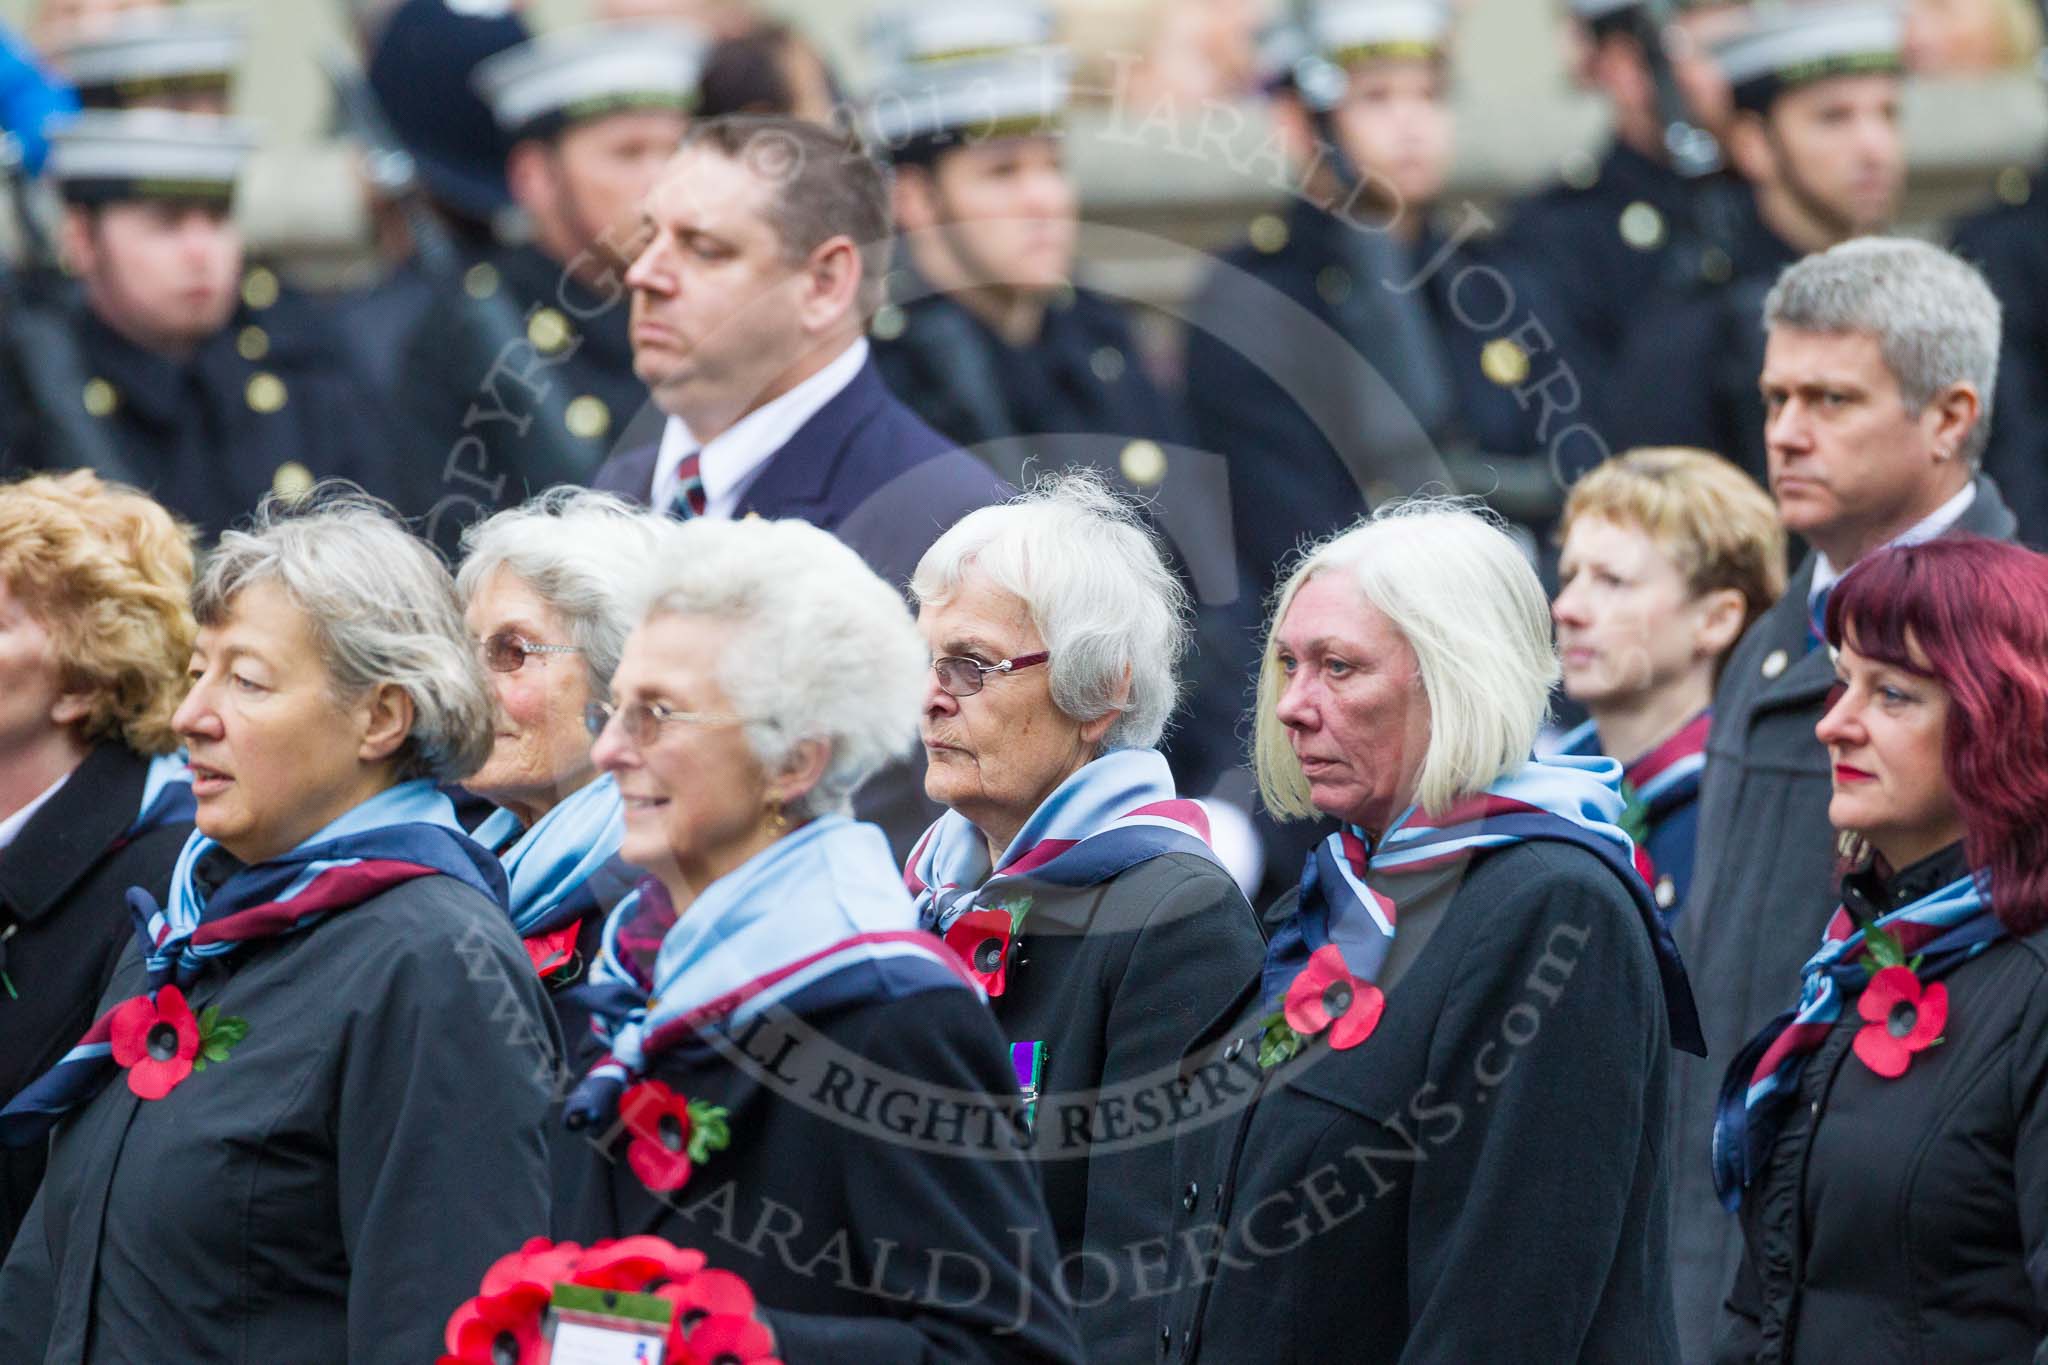 Remembrance Sunday at the Cenotaph 2015: Group C25, Princess Mary's Royal Air Force Nursing Service Association.
Cenotaph, Whitehall, London SW1,
London,
Greater London,
United Kingdom,
on 08 November 2015 at 11:50, image #571